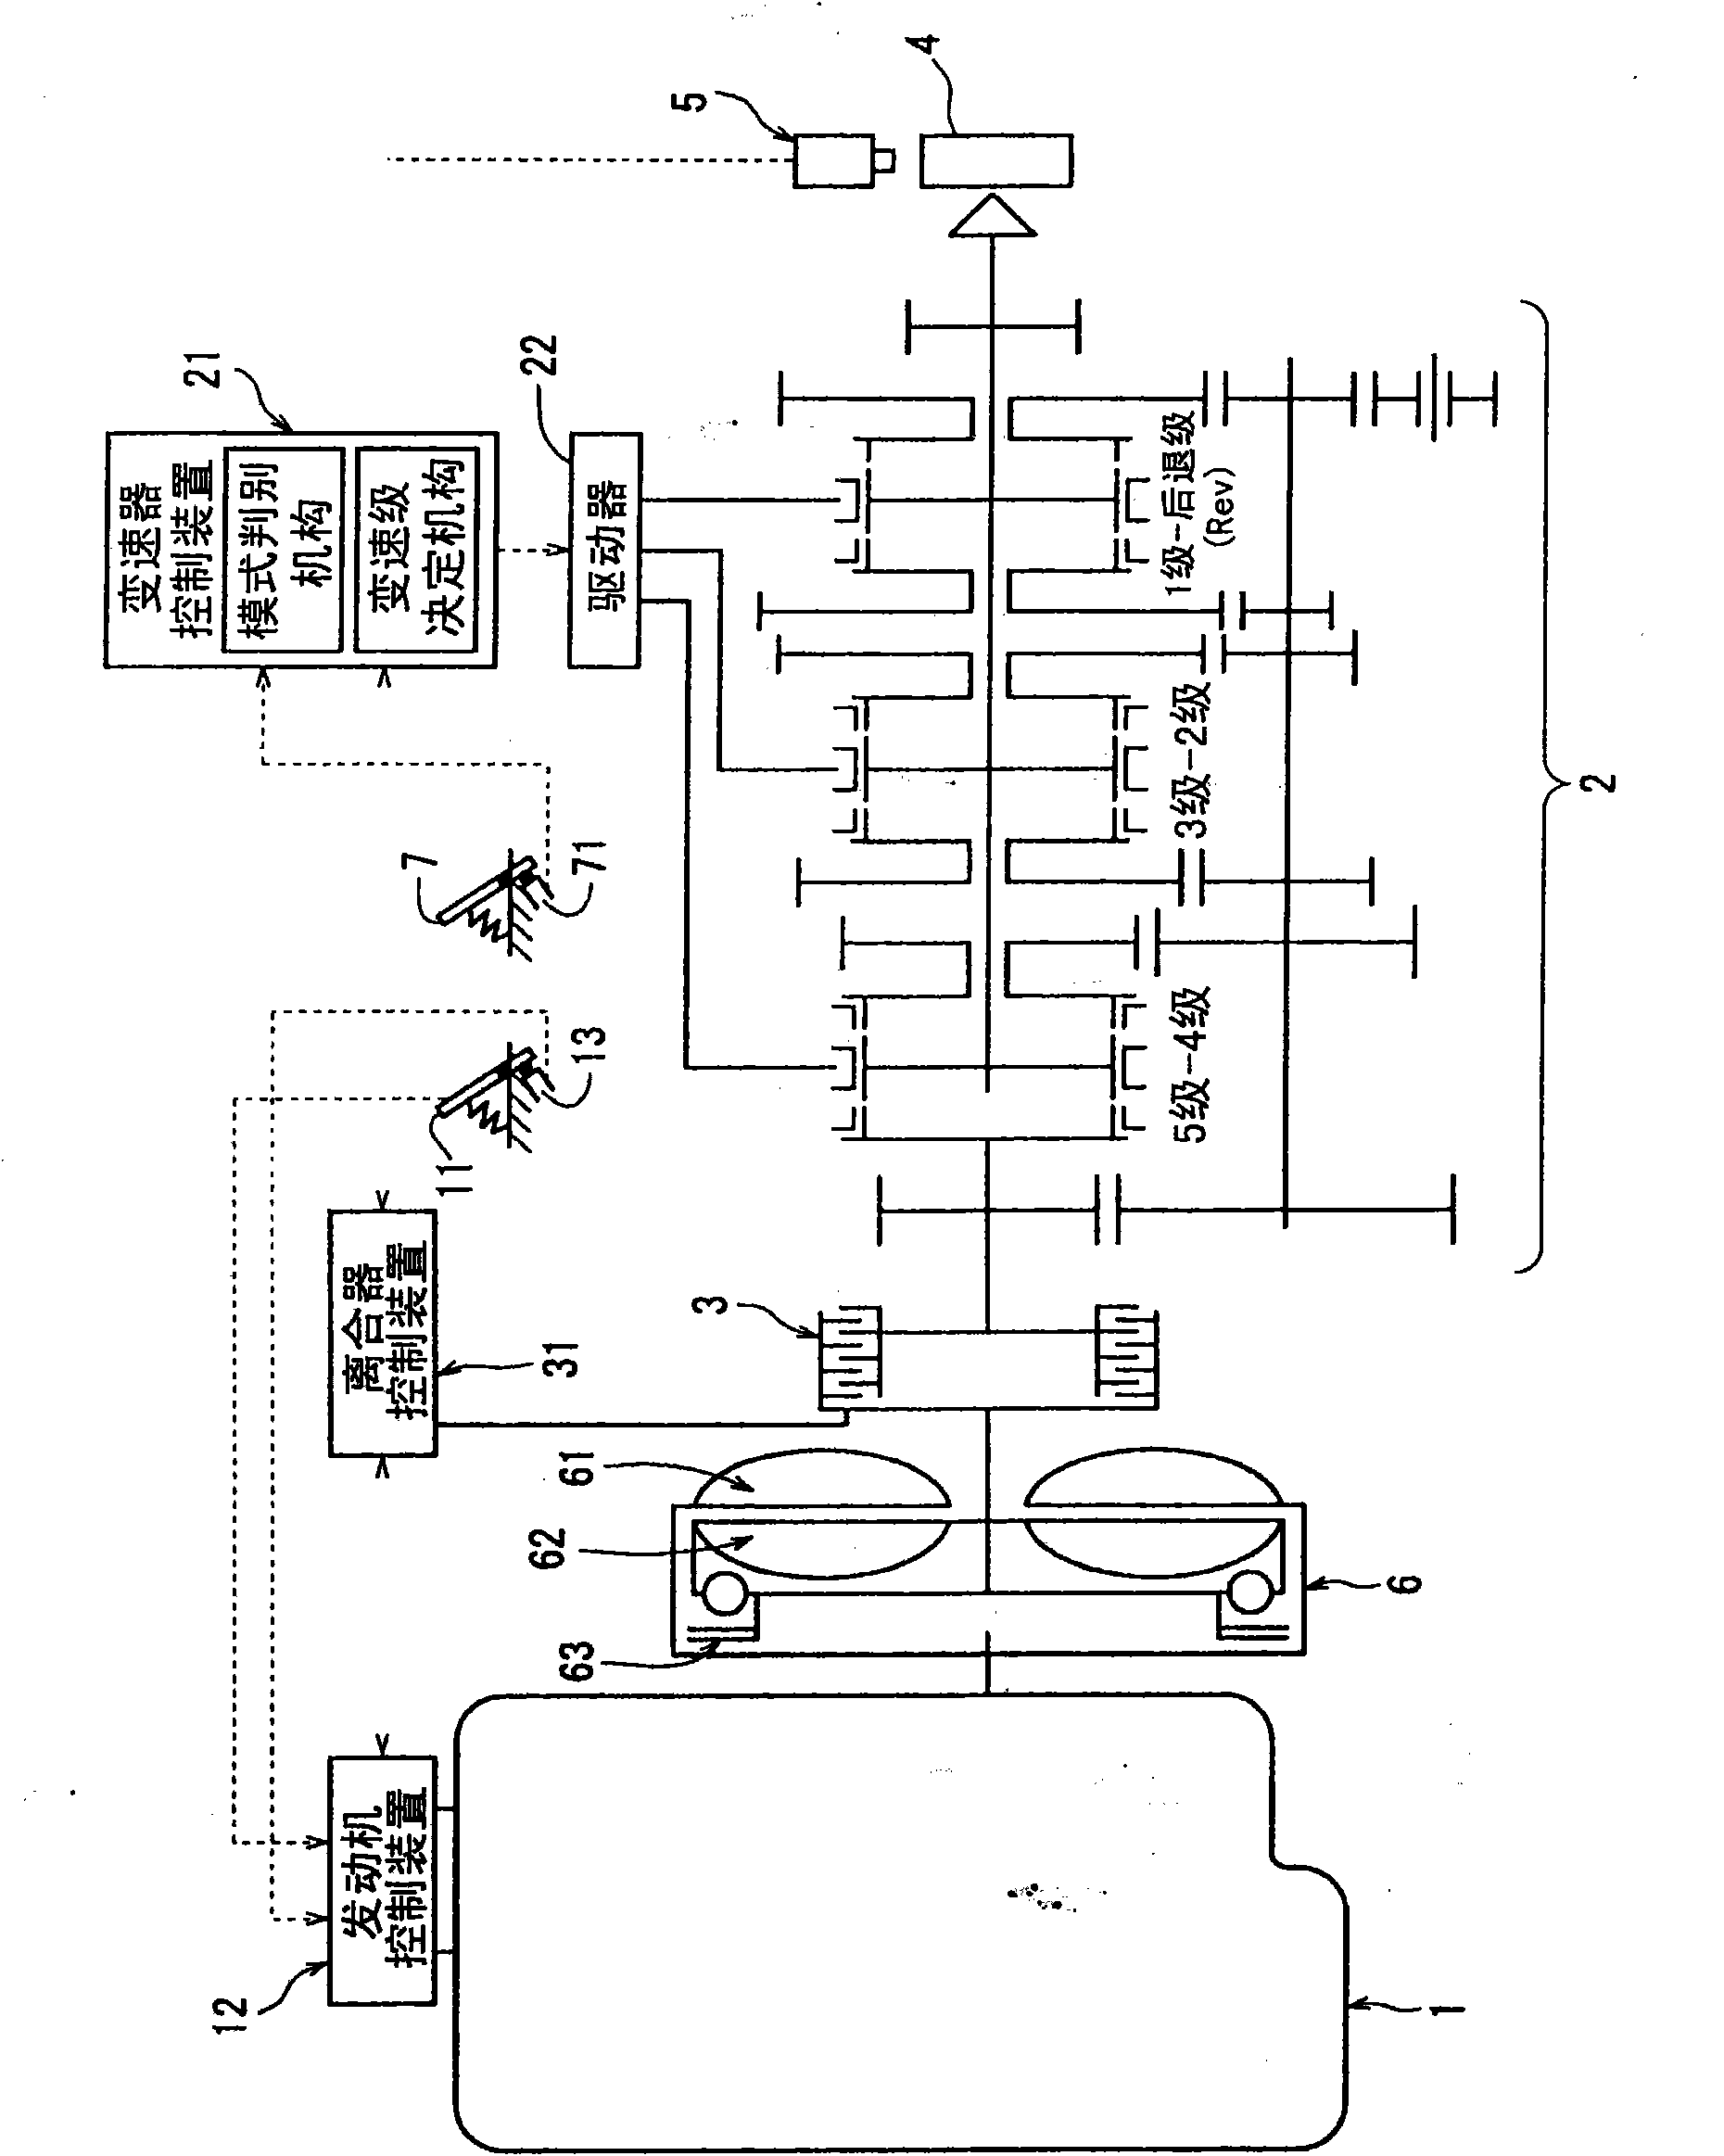 Gear shift controller for vehicle transmission